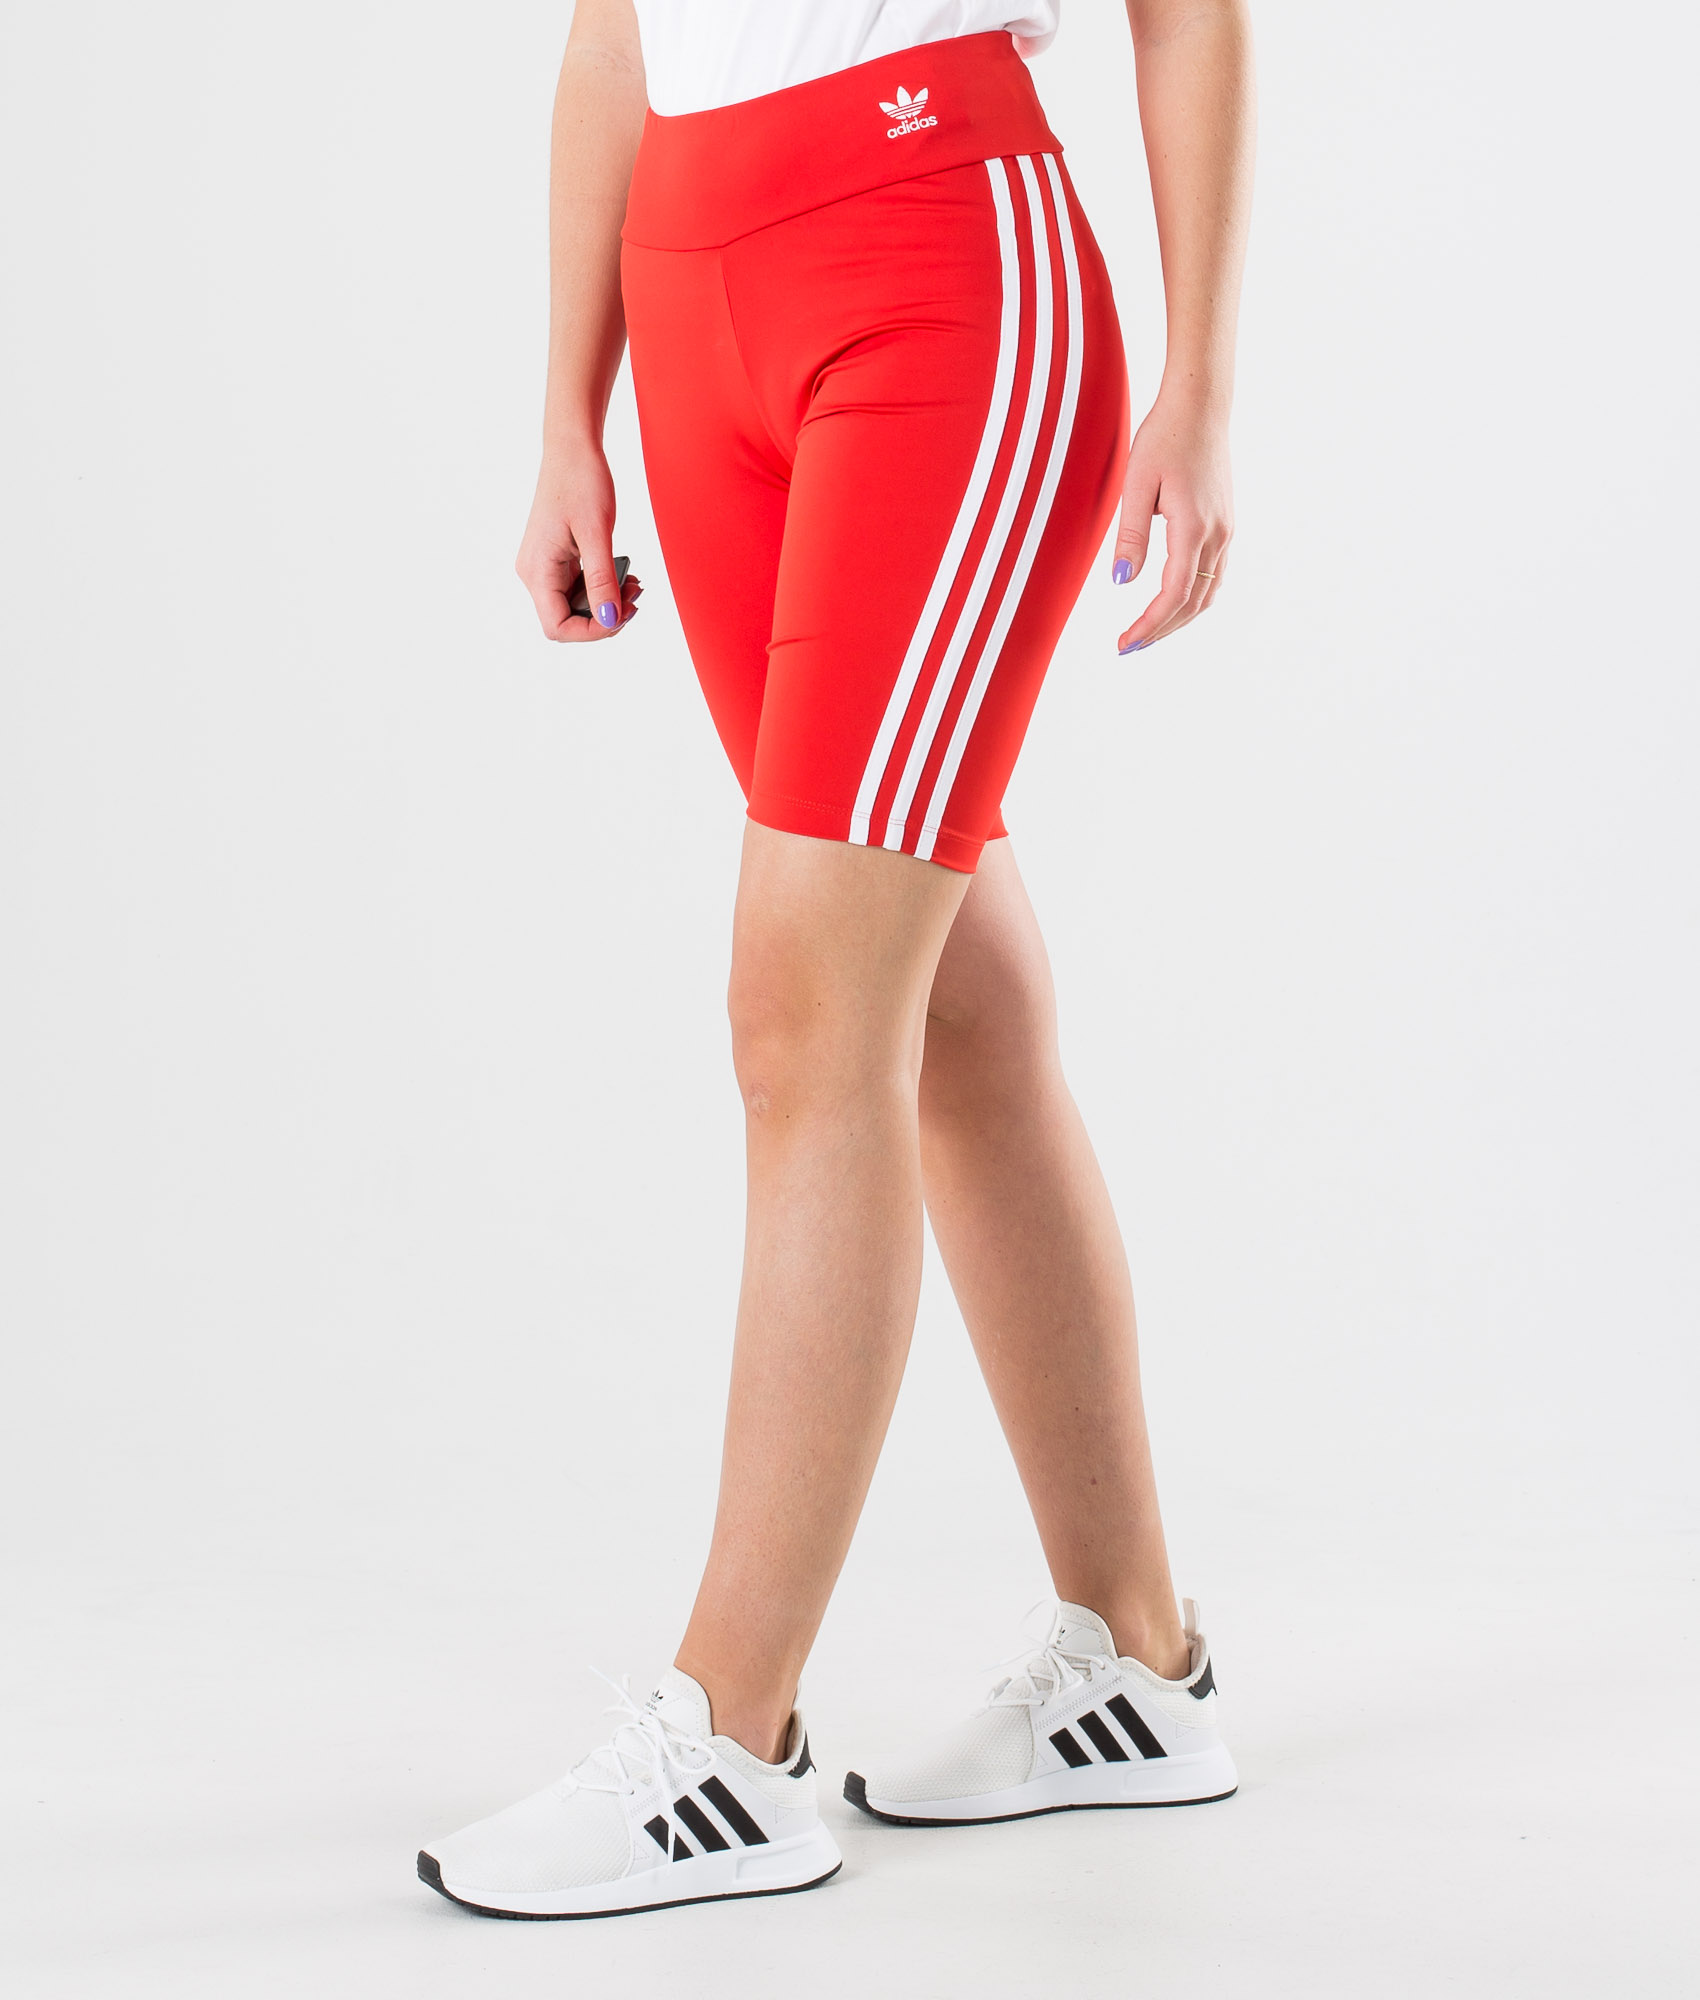 red and white adidas shorts